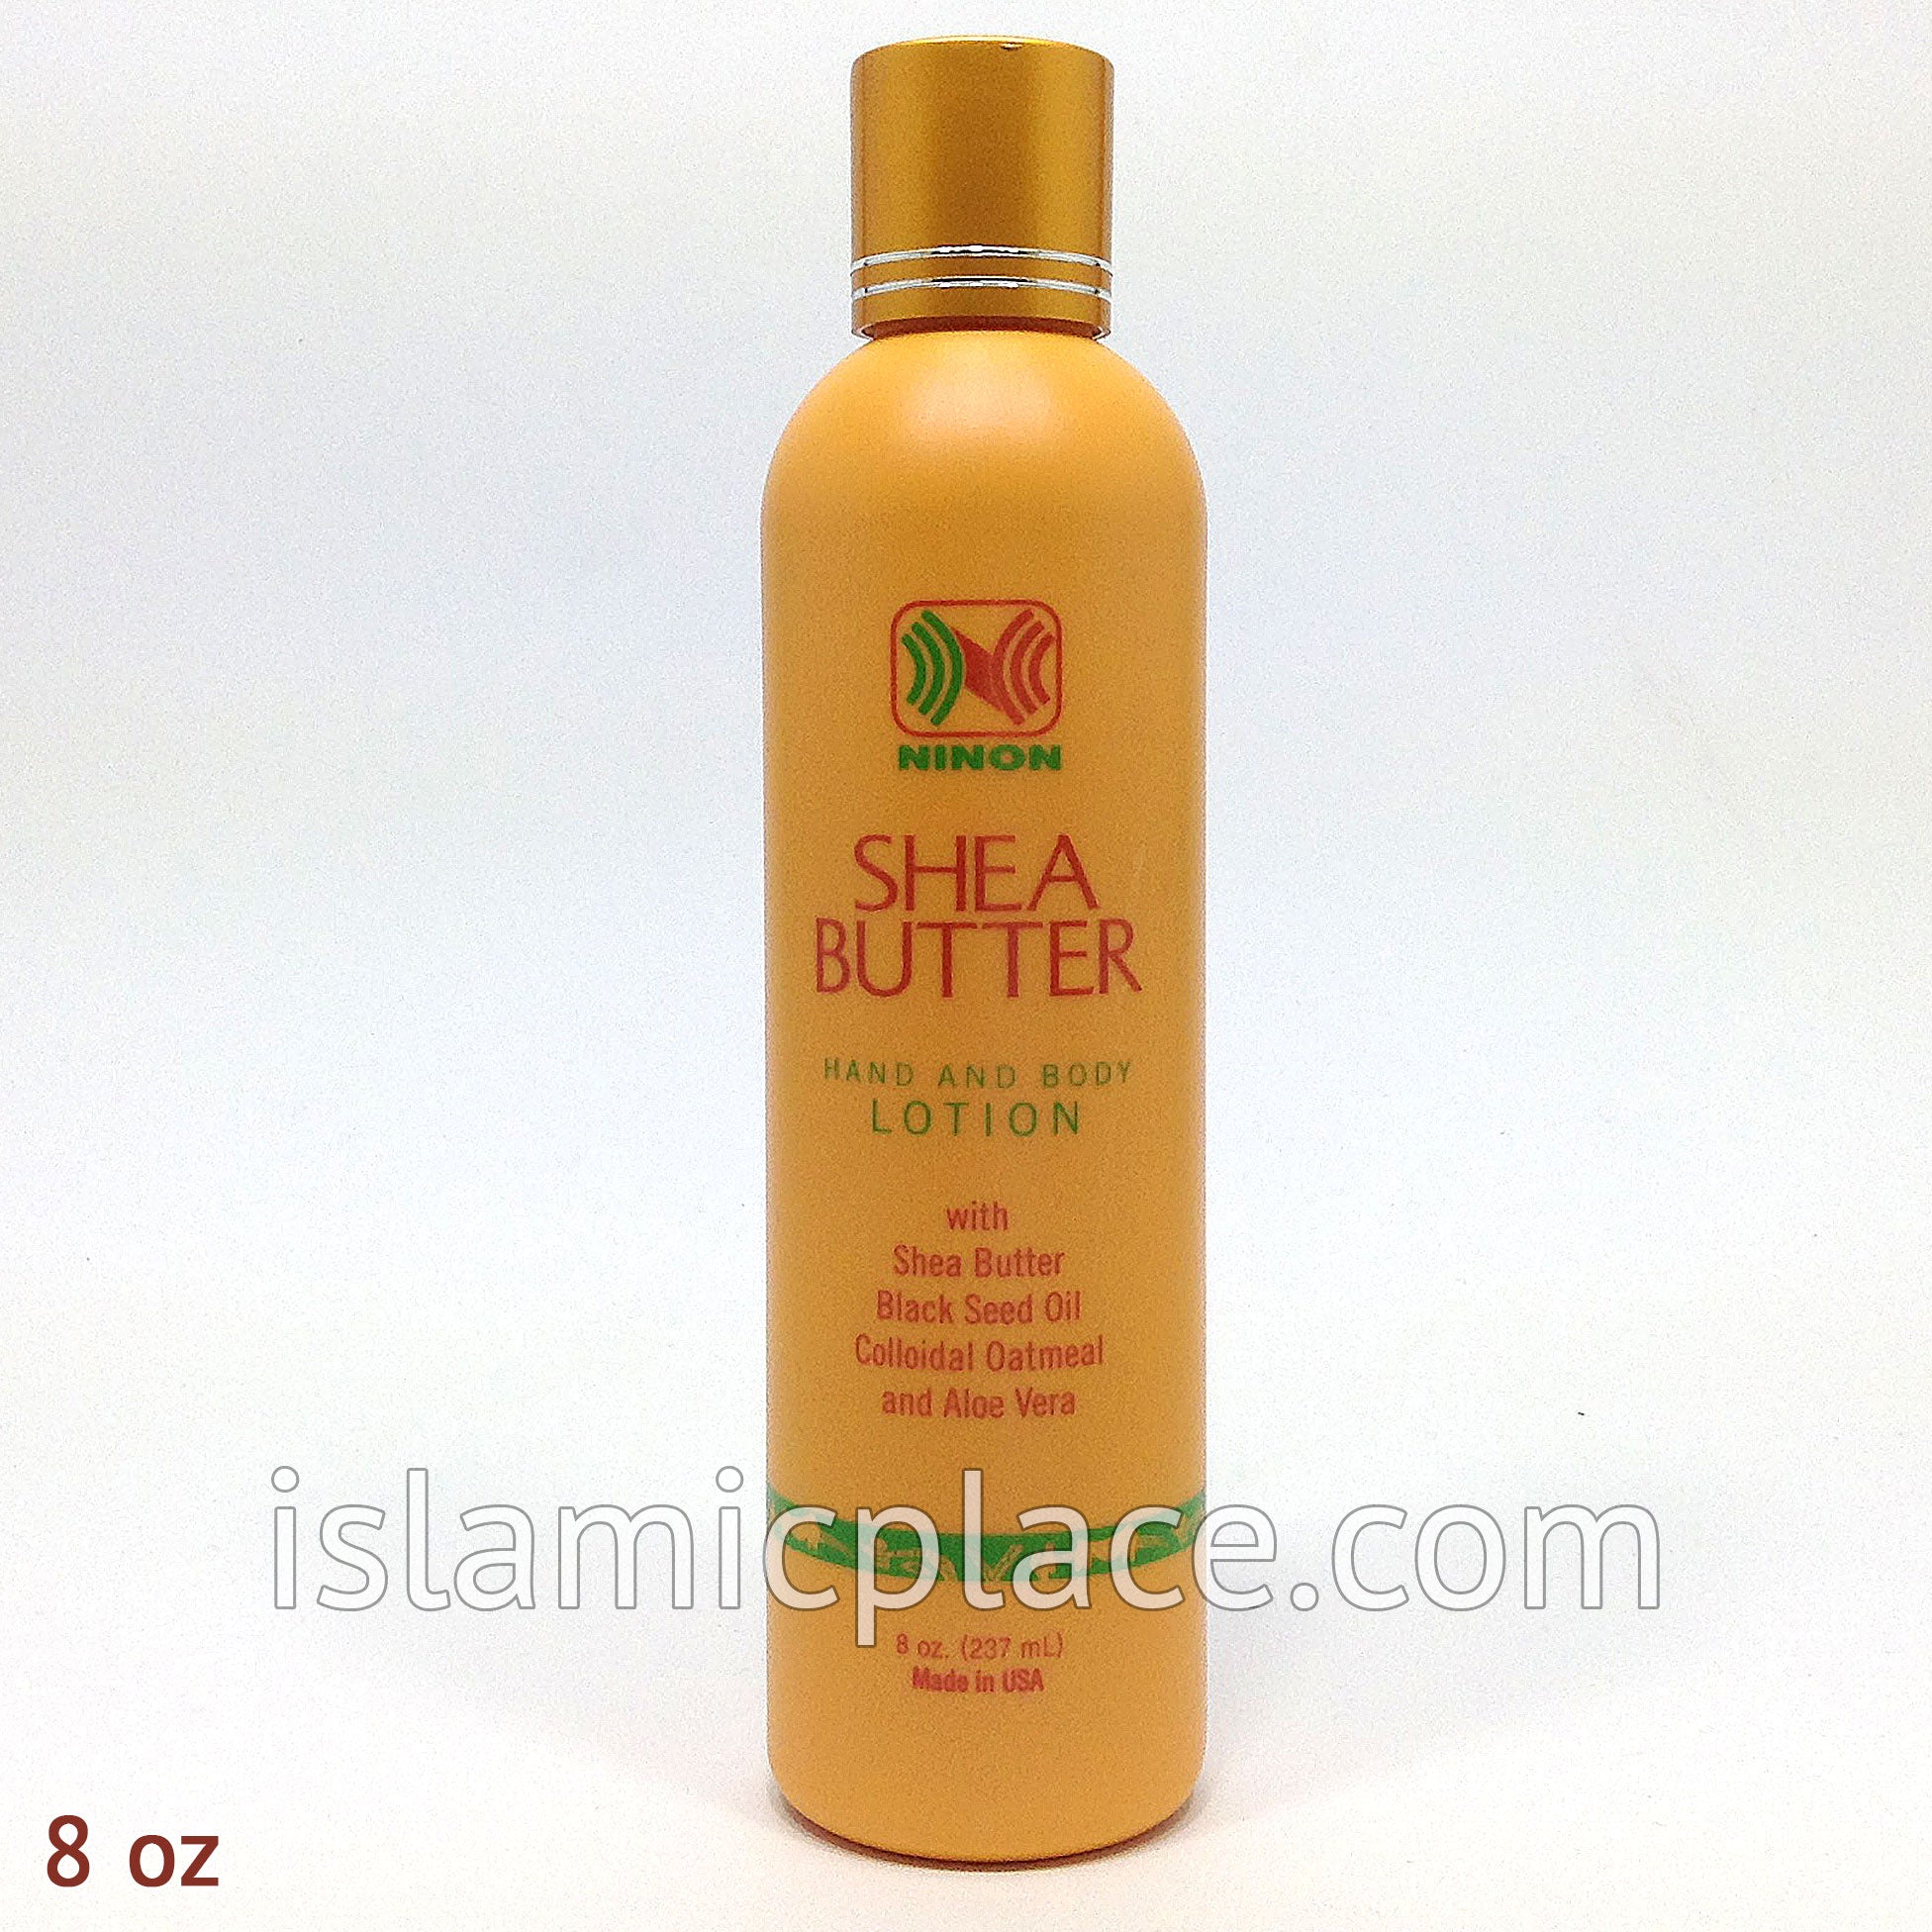 Shea Butter Hand and Body Lotion - 8 oz